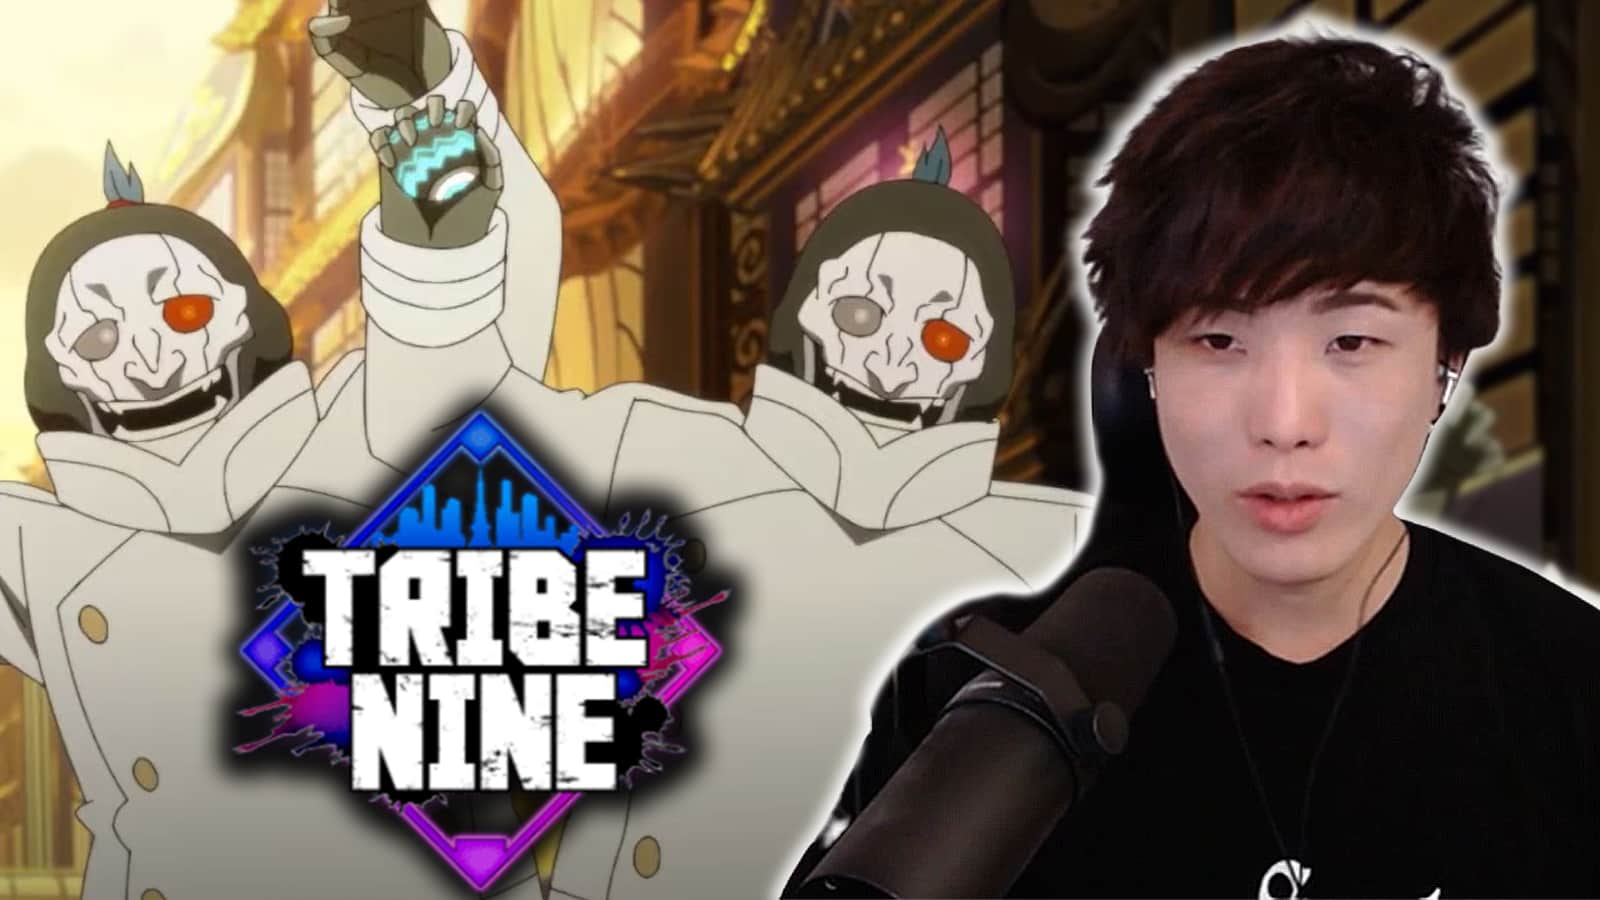 Sykkuno eplains why Tribe Nine voice acting was scary